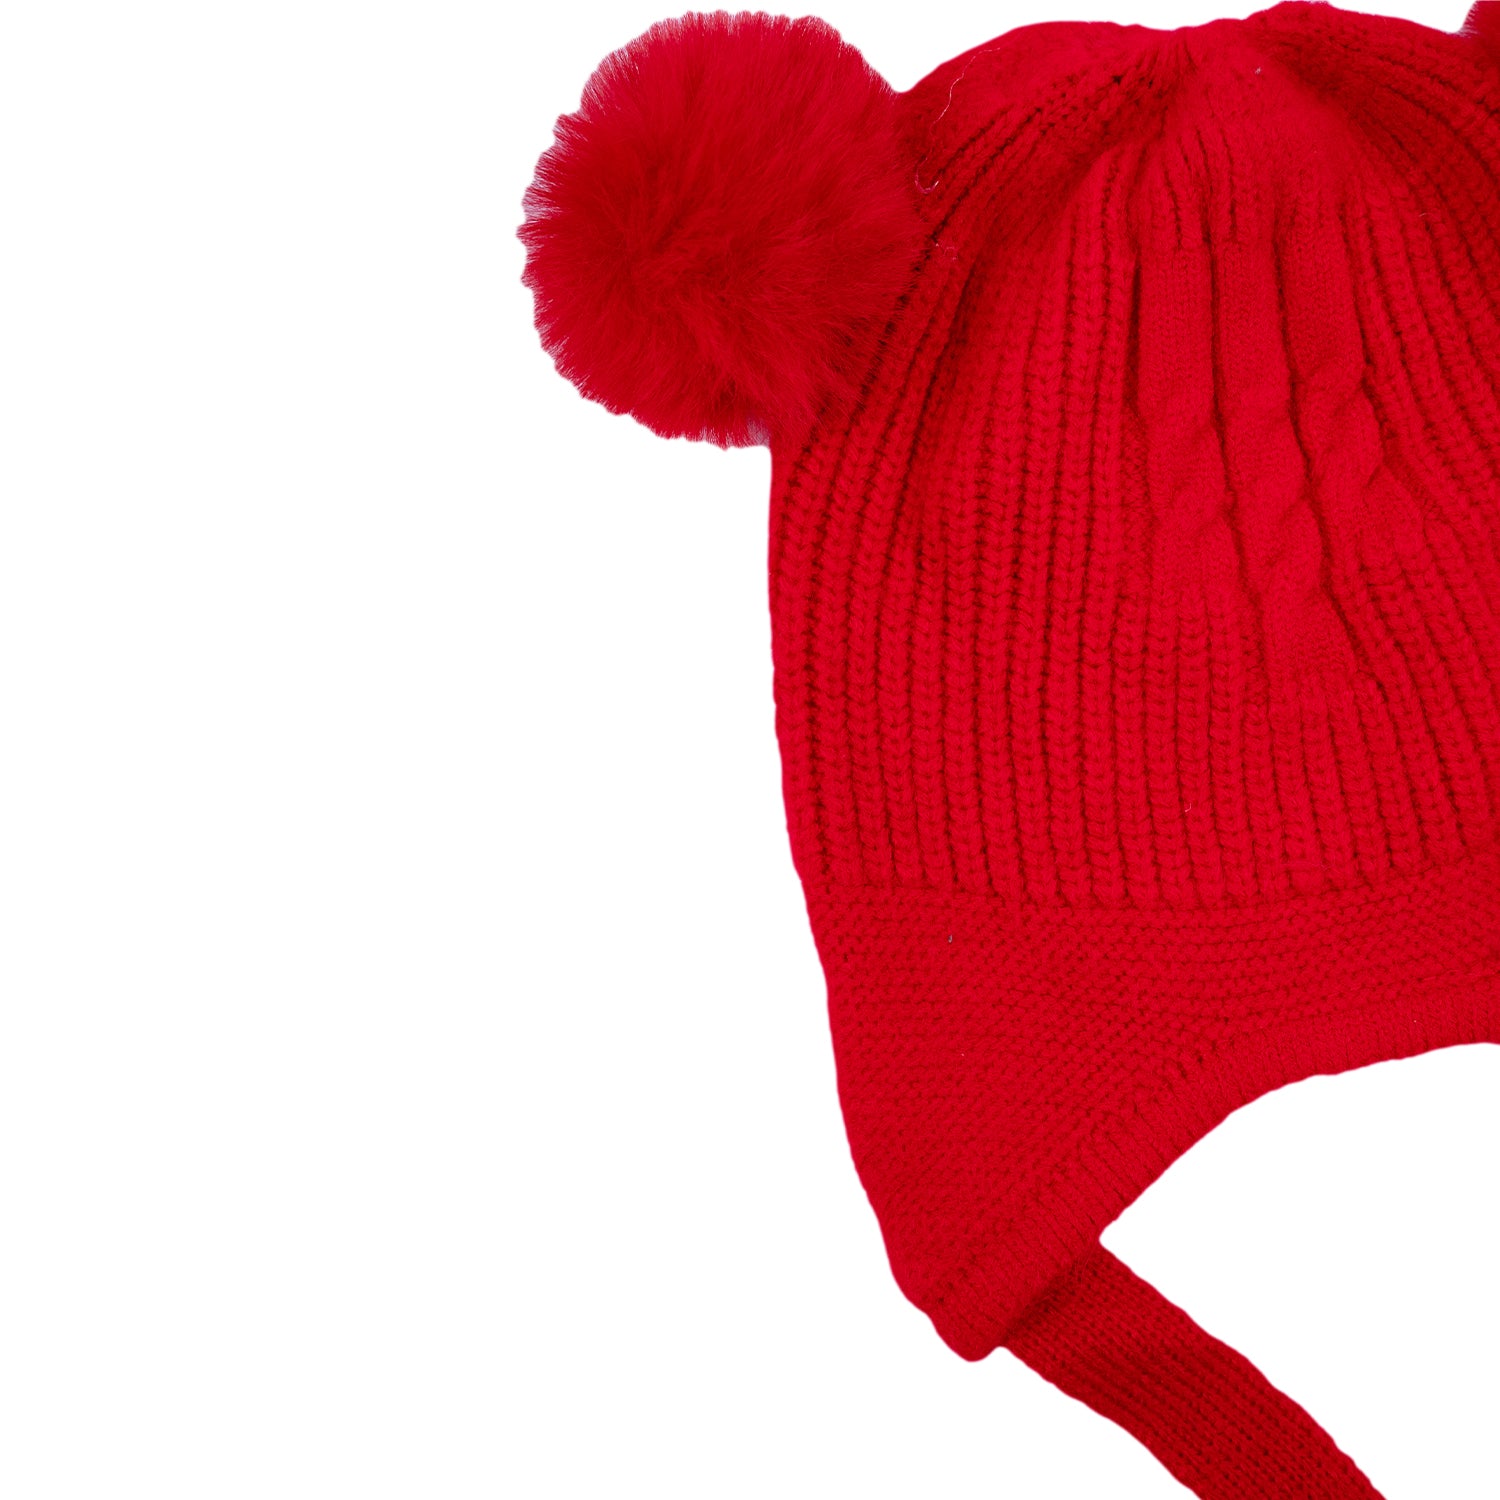 Baby Moo Solid Infant To Toddler Winter Beanie Woollen Cap - Red